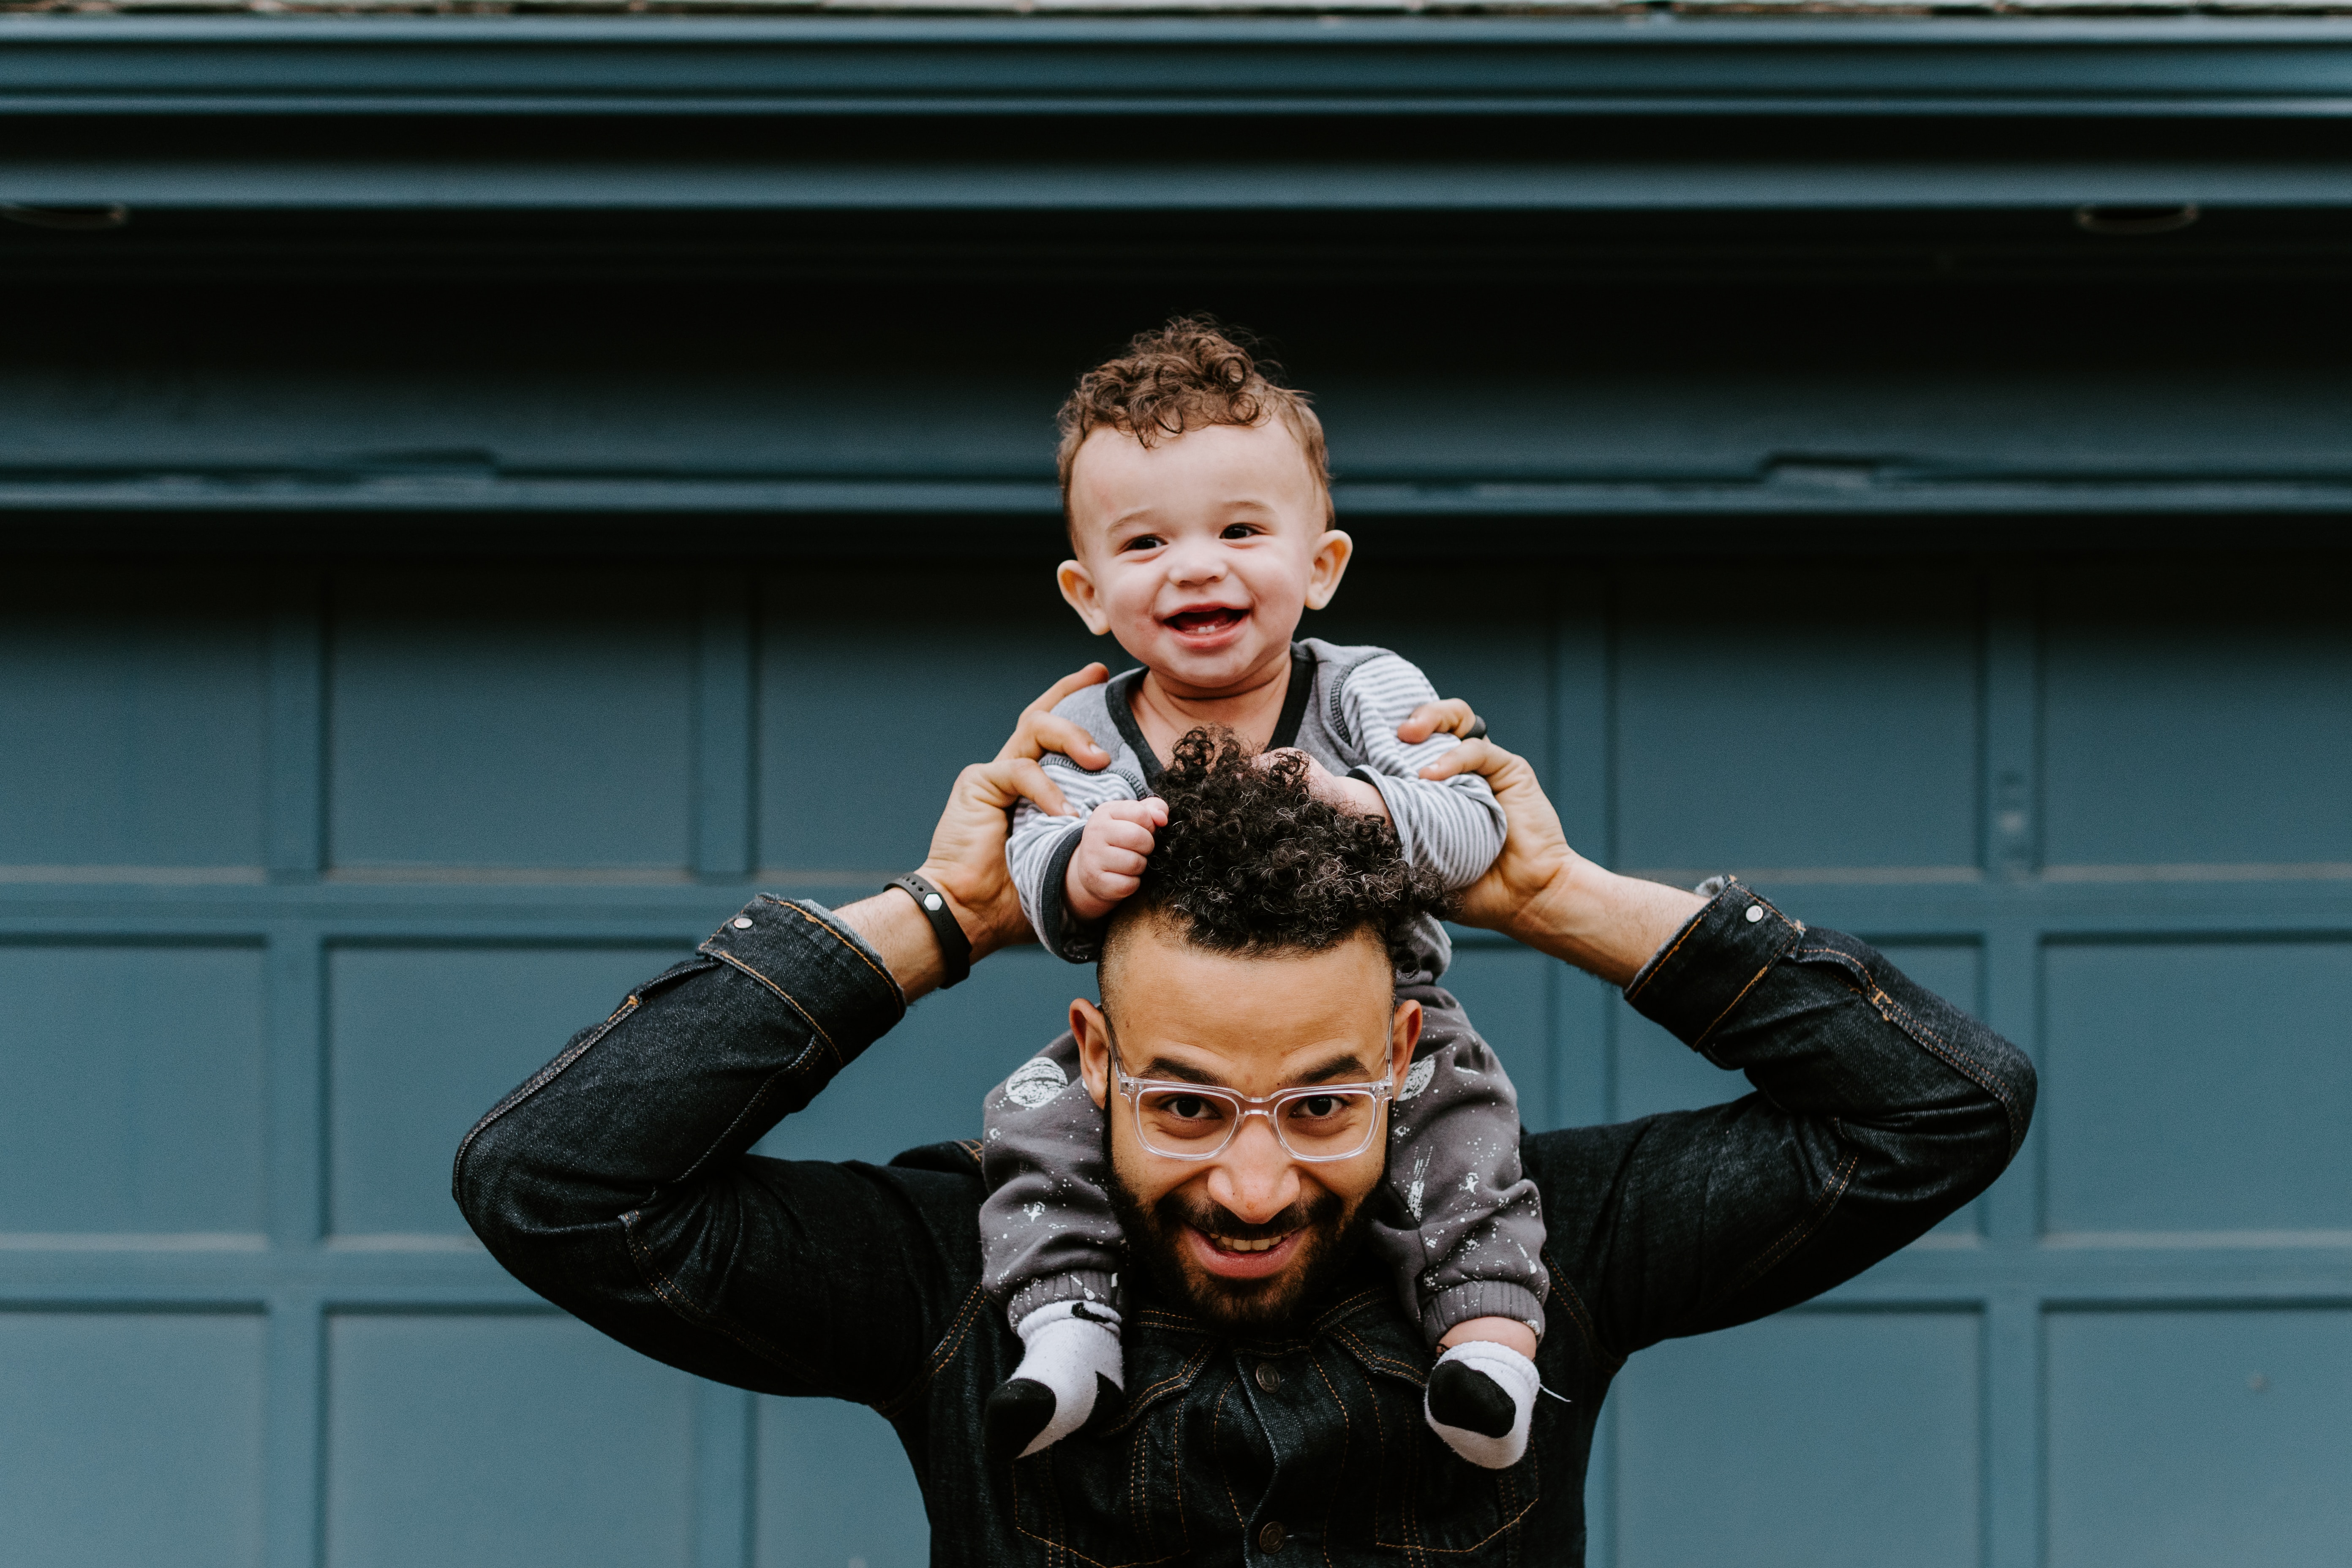 dad with young child on his shoulders, both smiling